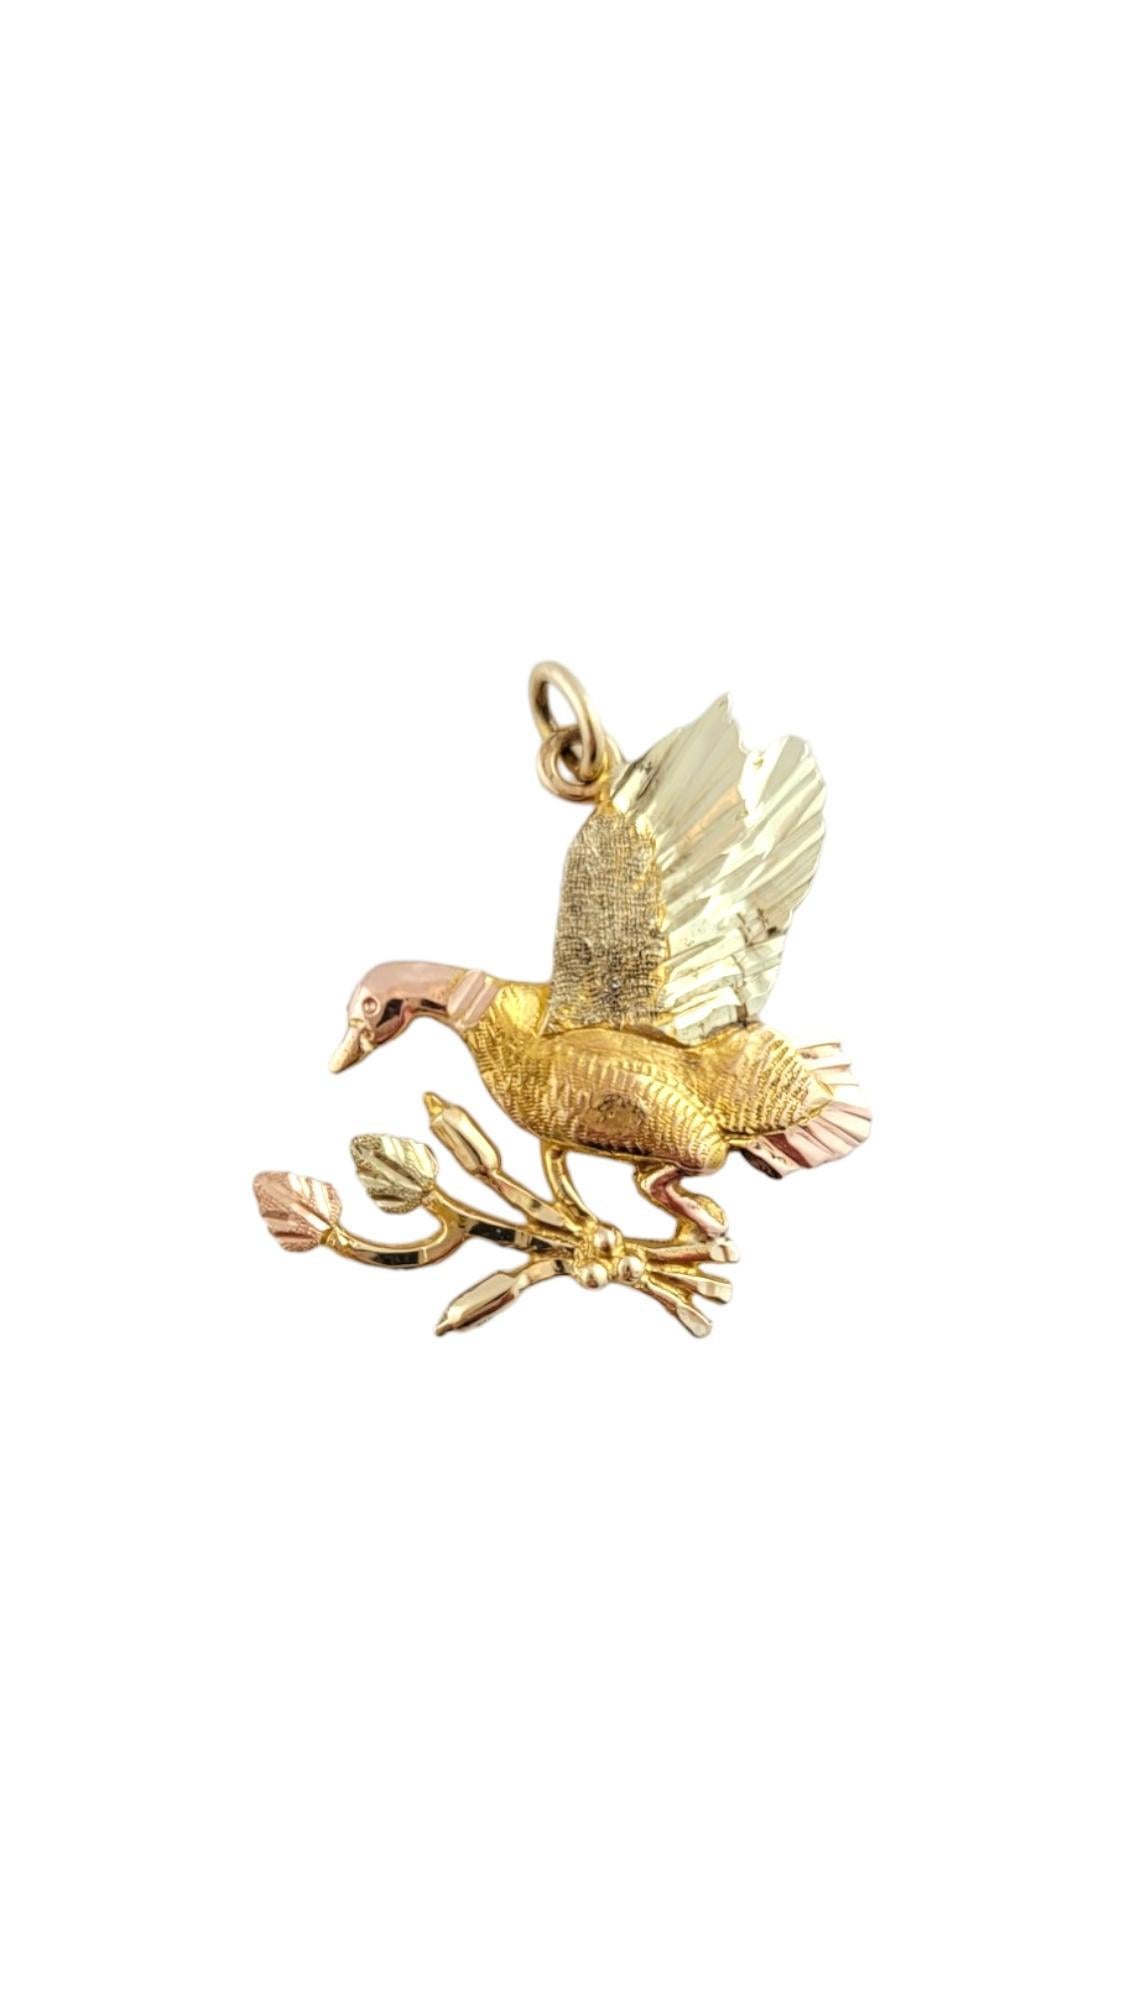 Vintage 10K Yellow Gold Flying Bird Charm - 

Flying bird charm carrying cattail weeds in 14K yellow gold.

Hallmark: 10K

Weight: 1.9 g/ 1.2 dwt.

Measurements: 21.47 mm X 18.36 mm

Very good condition, professionally polished.

Will come packaged